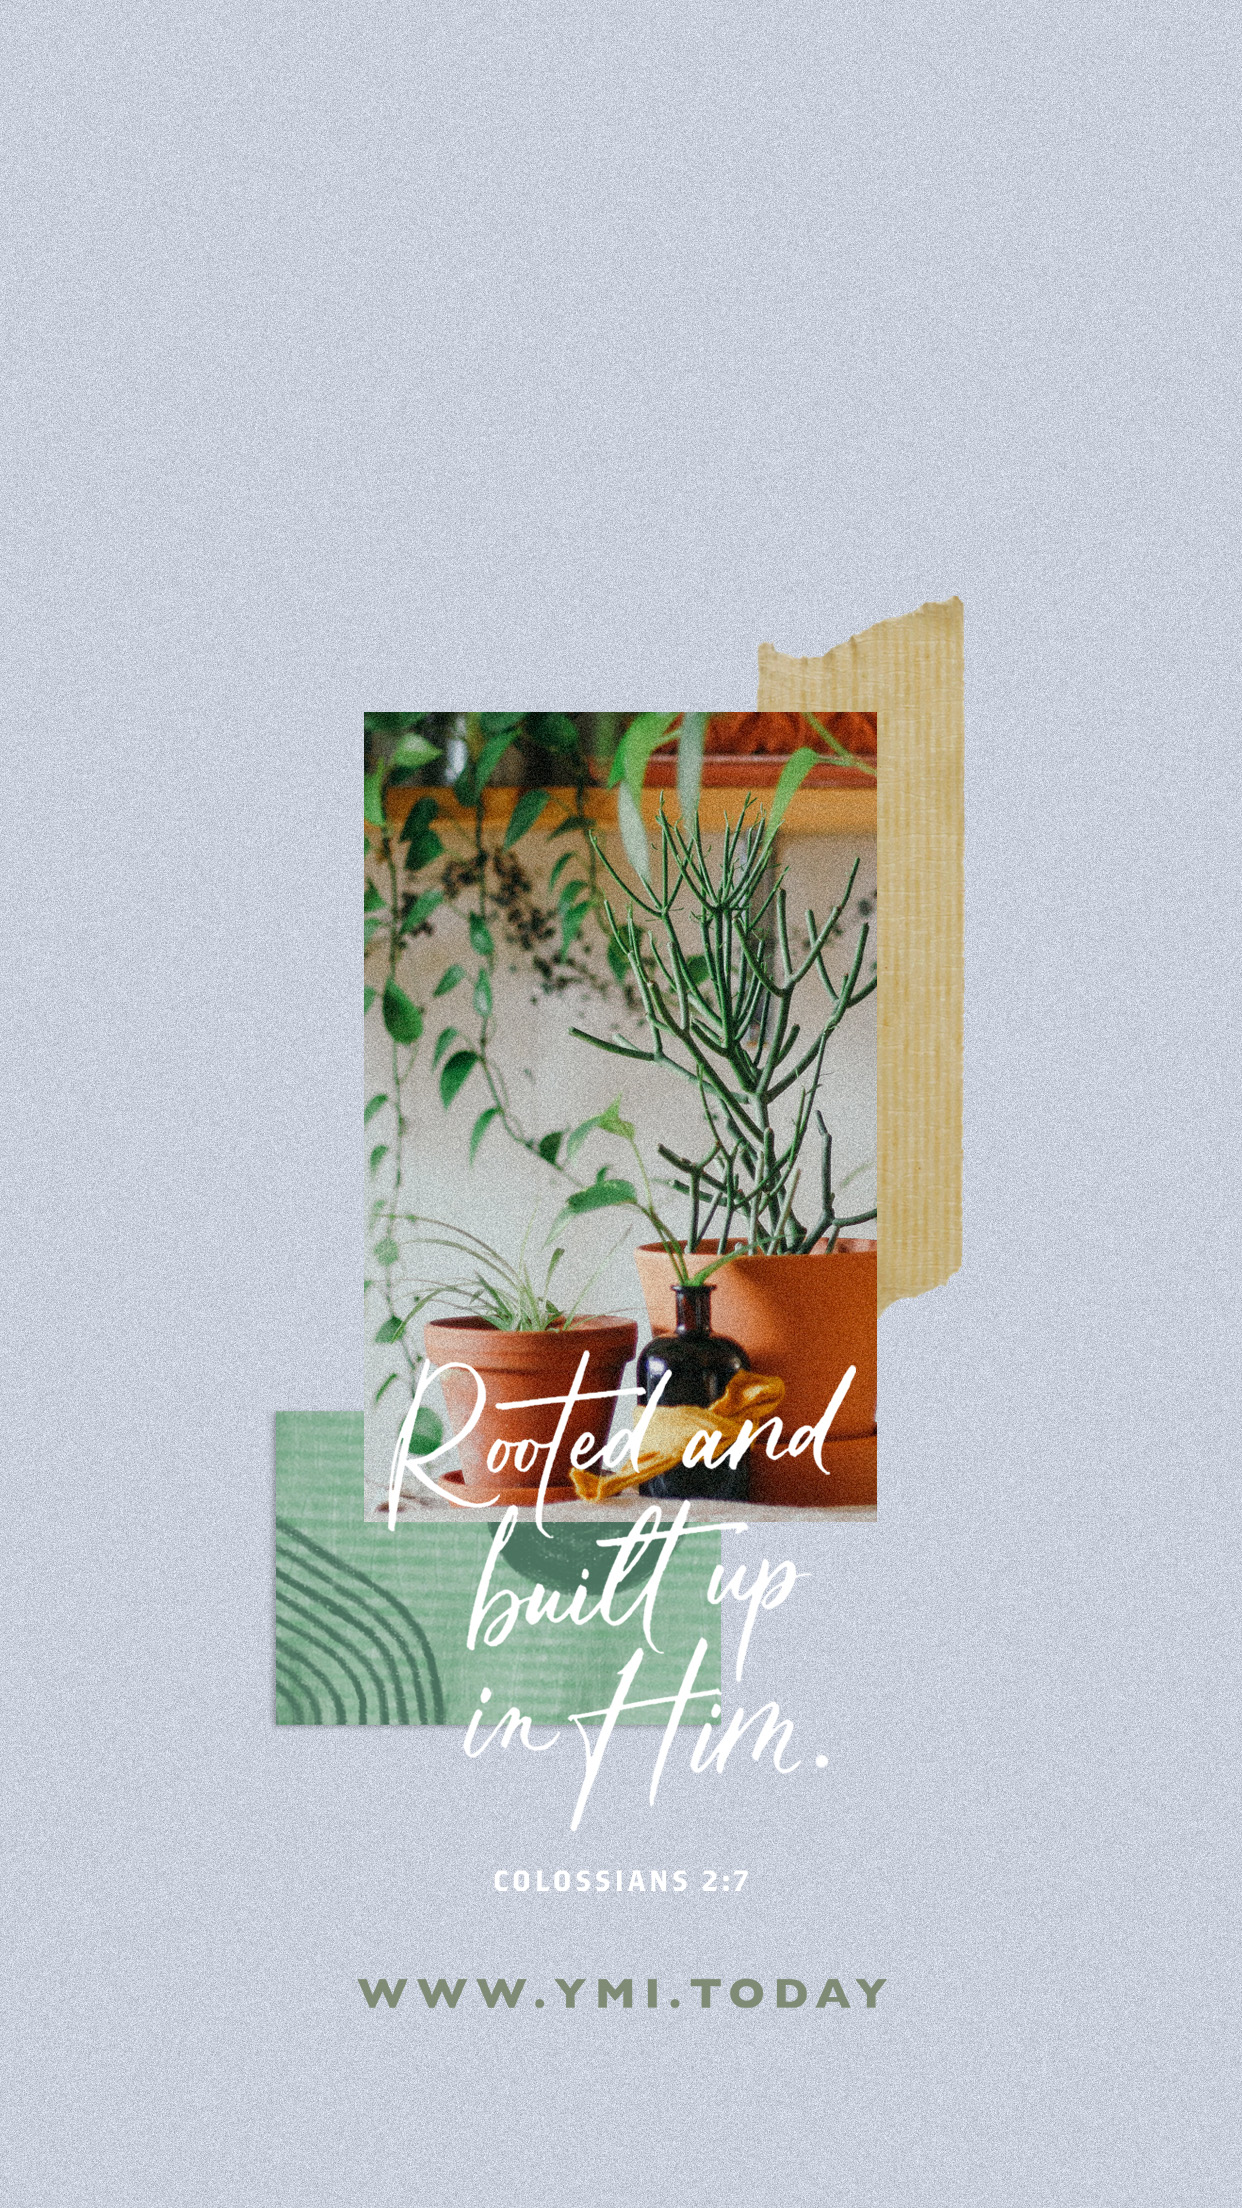 YMI January 2020 Phone Lockscreen - Routed and built up in Him. - Colossians 2:7